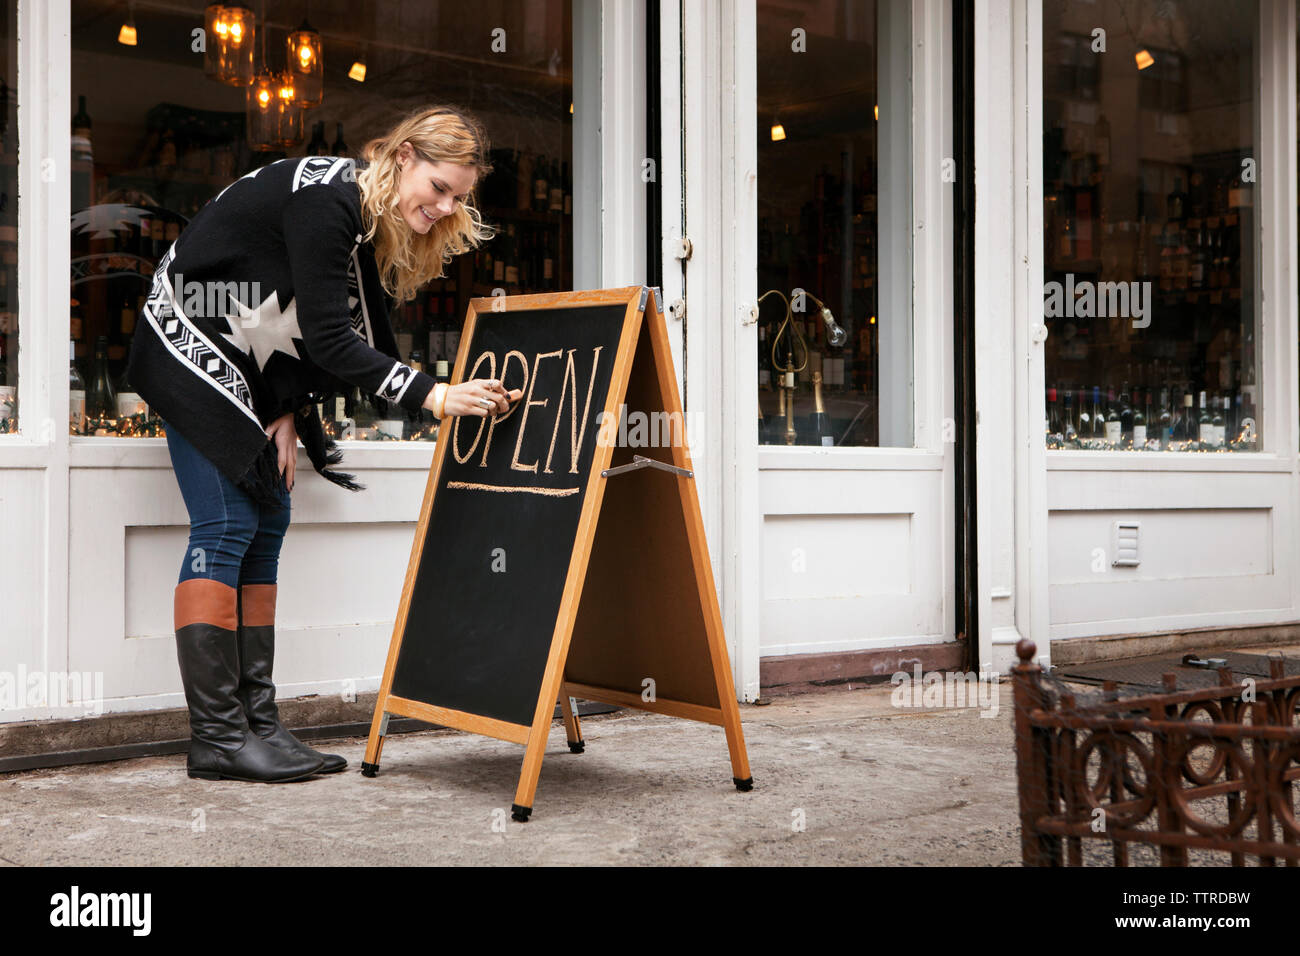 female small business owner making open sign outside wine shop Stock Photo